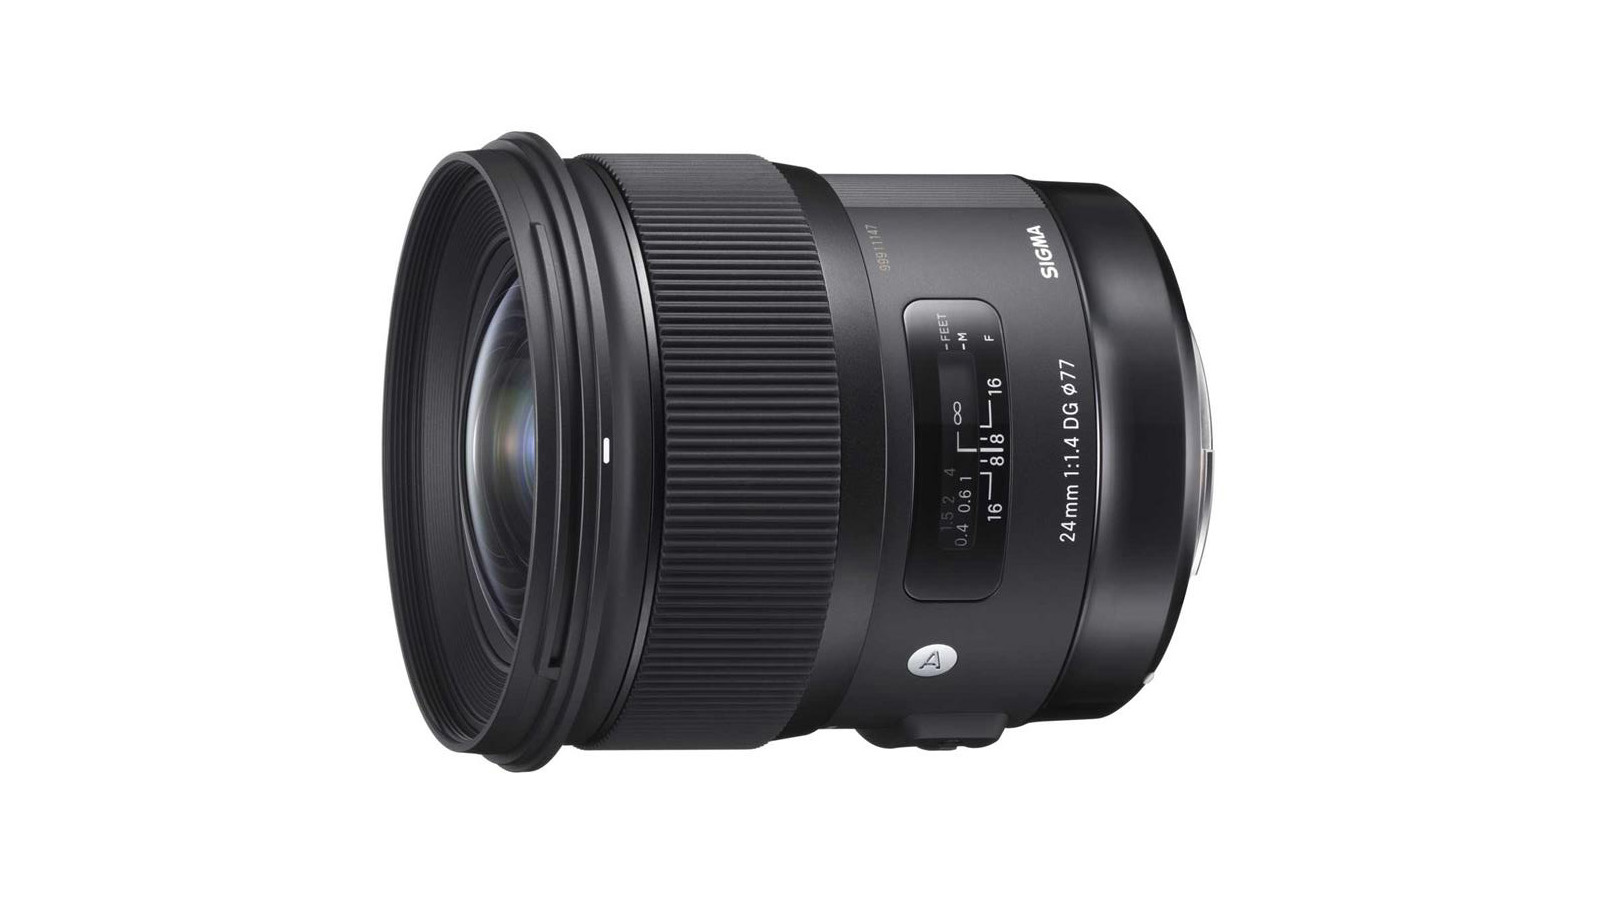 Best lens for street photography: Sigma 24mm f/1.4 DG HSM | A